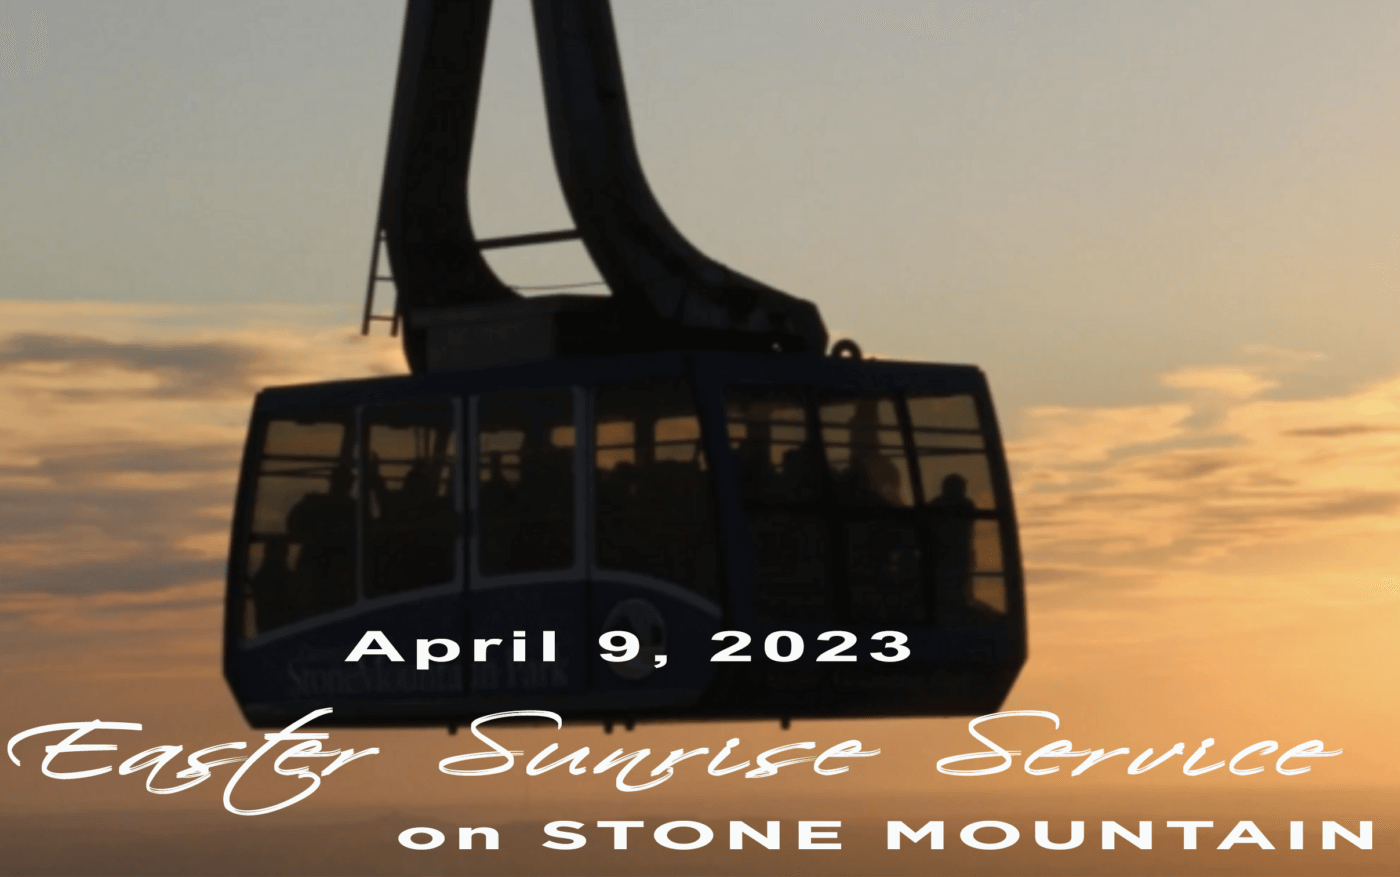 EASTER SUNRISE SERVICE ON STONE MOUNTAIN APRIL 11, 2023 - Right From The Heart Ministries